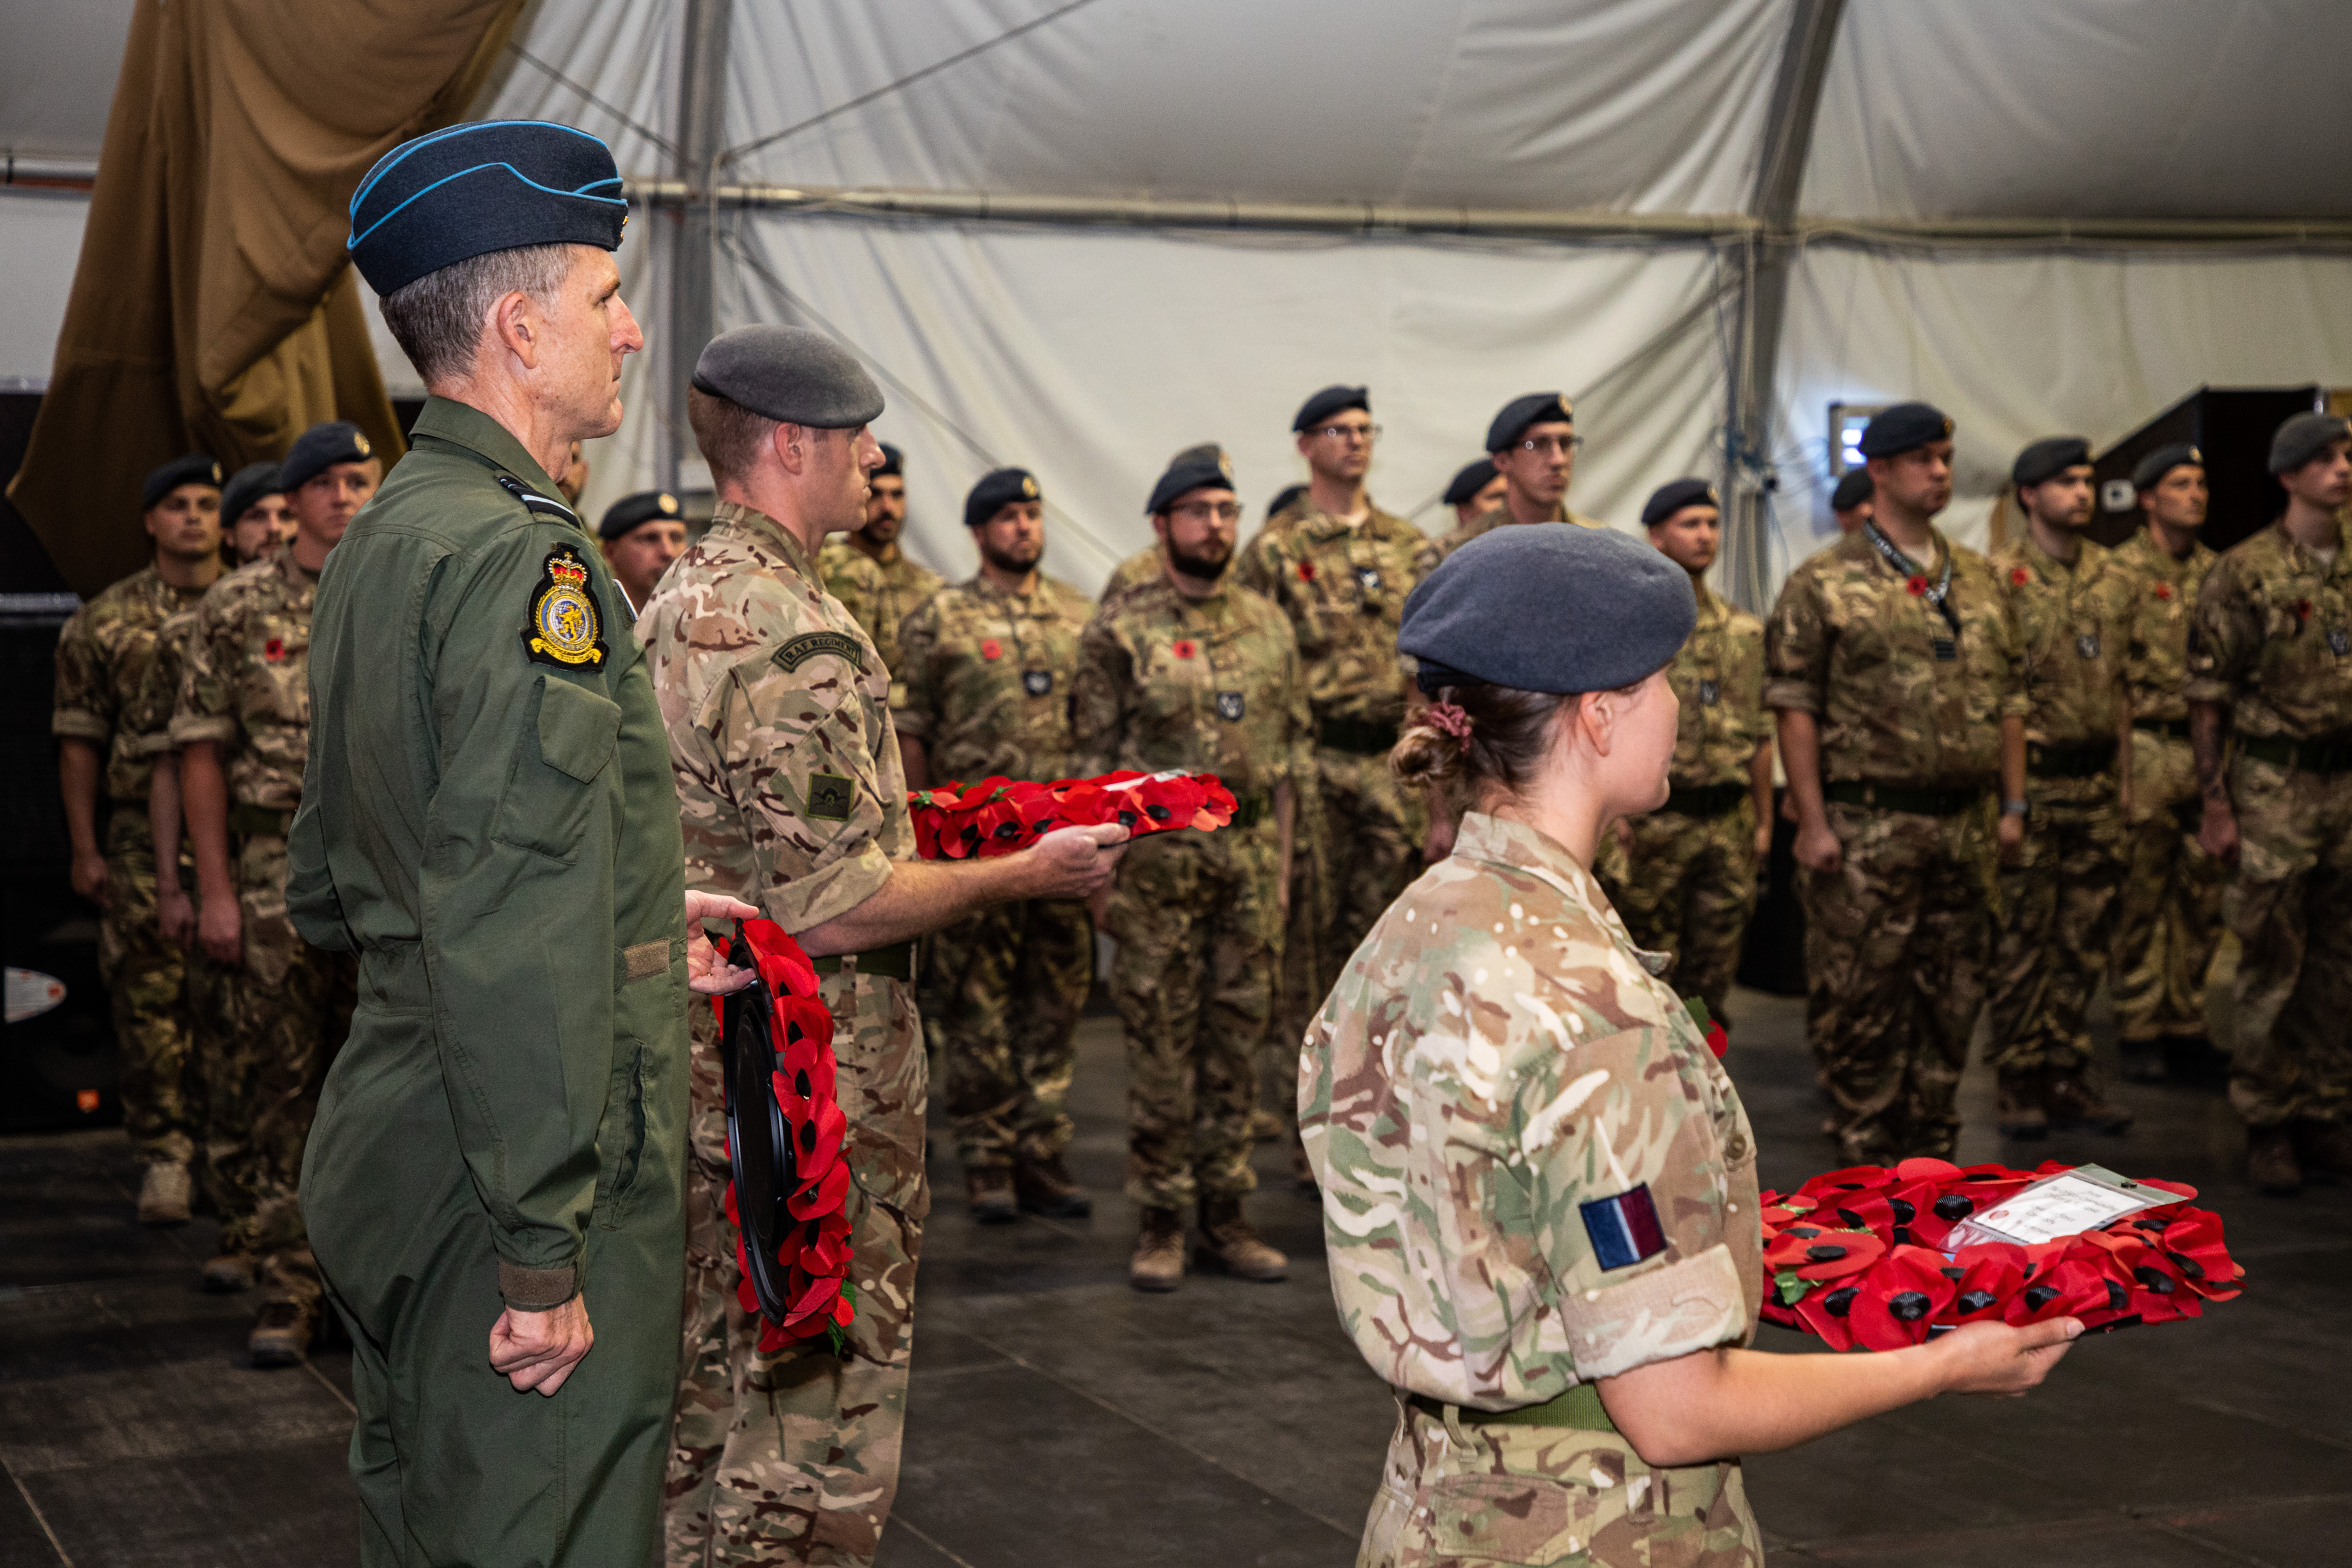 Personnel stand in tent with Poppy Wreaths.